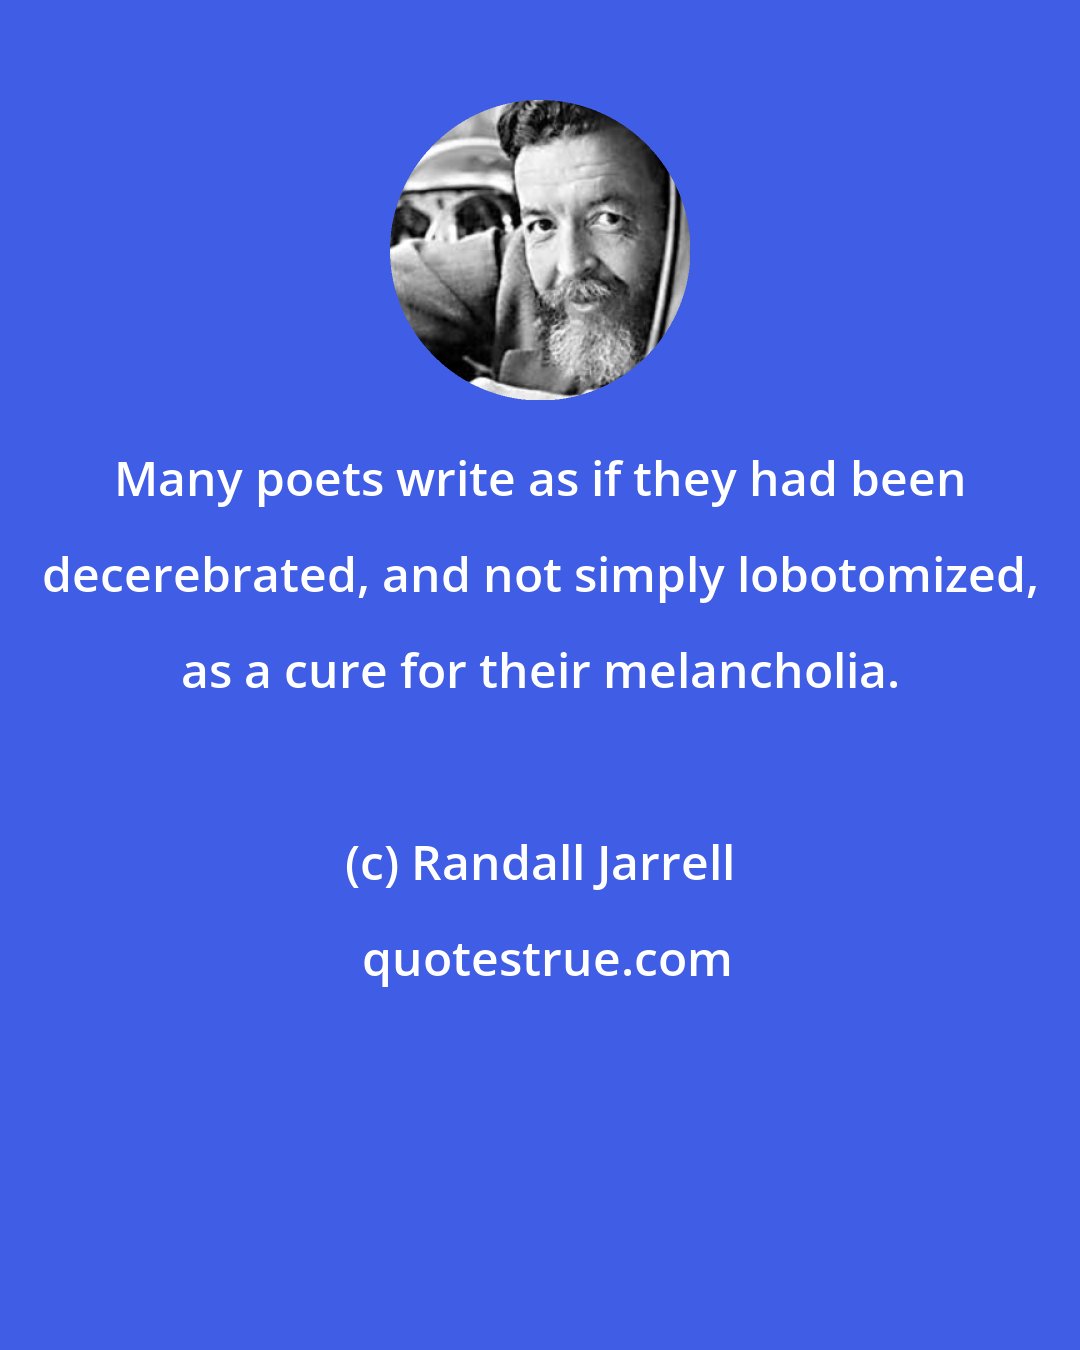 Randall Jarrell: Many poets write as if they had been decerebrated, and not simply lobotomized, as a cure for their melancholia.